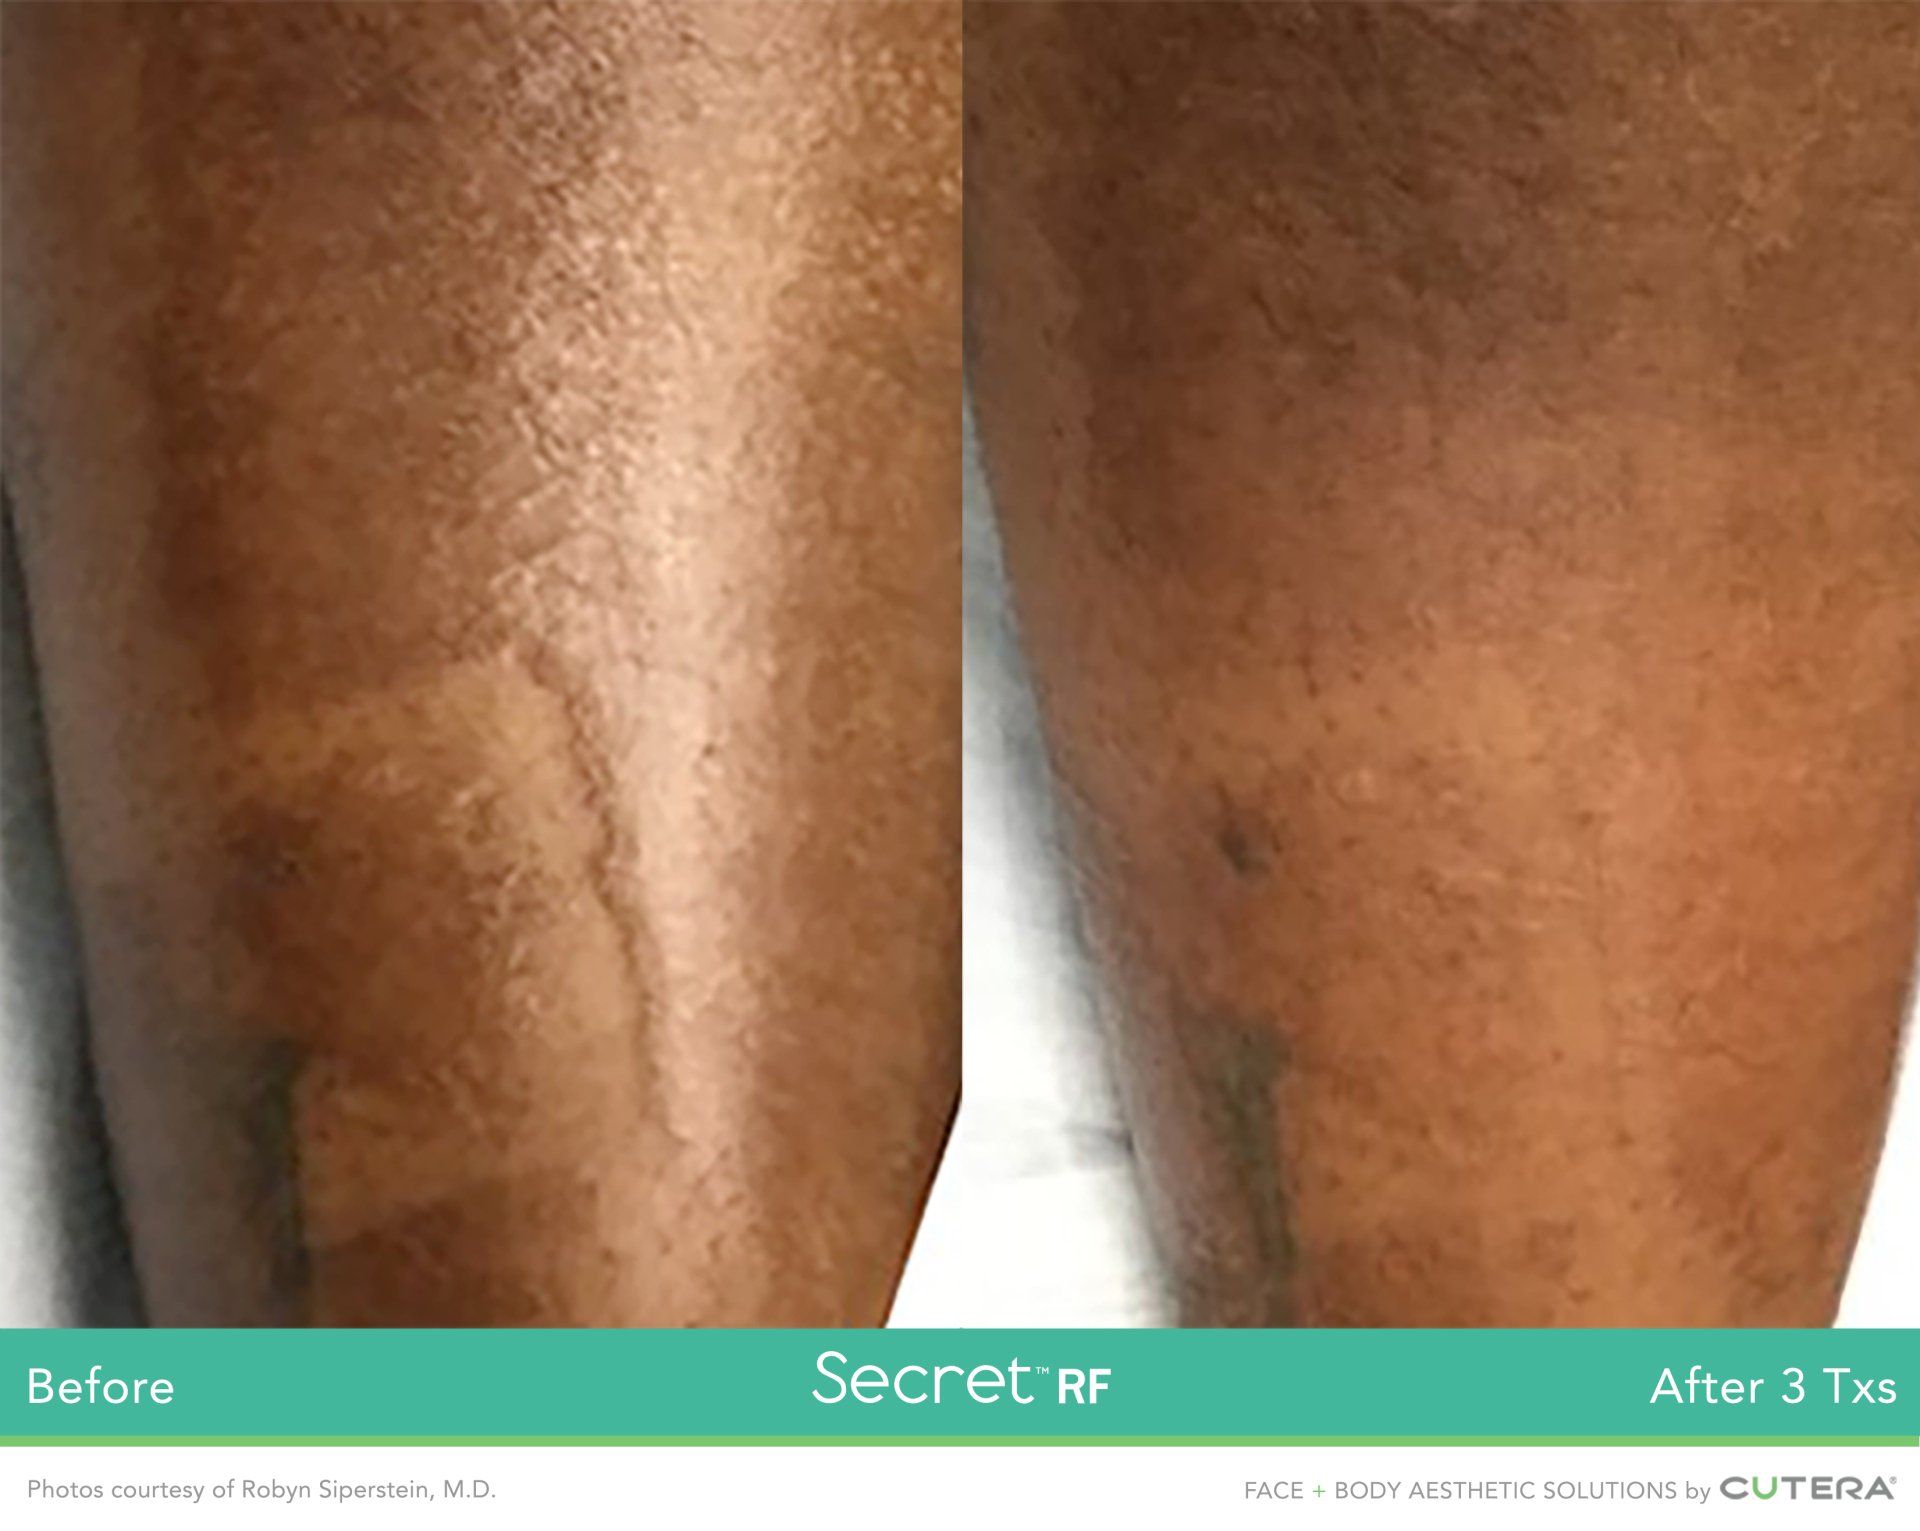 A before and after photo of a person 's leg